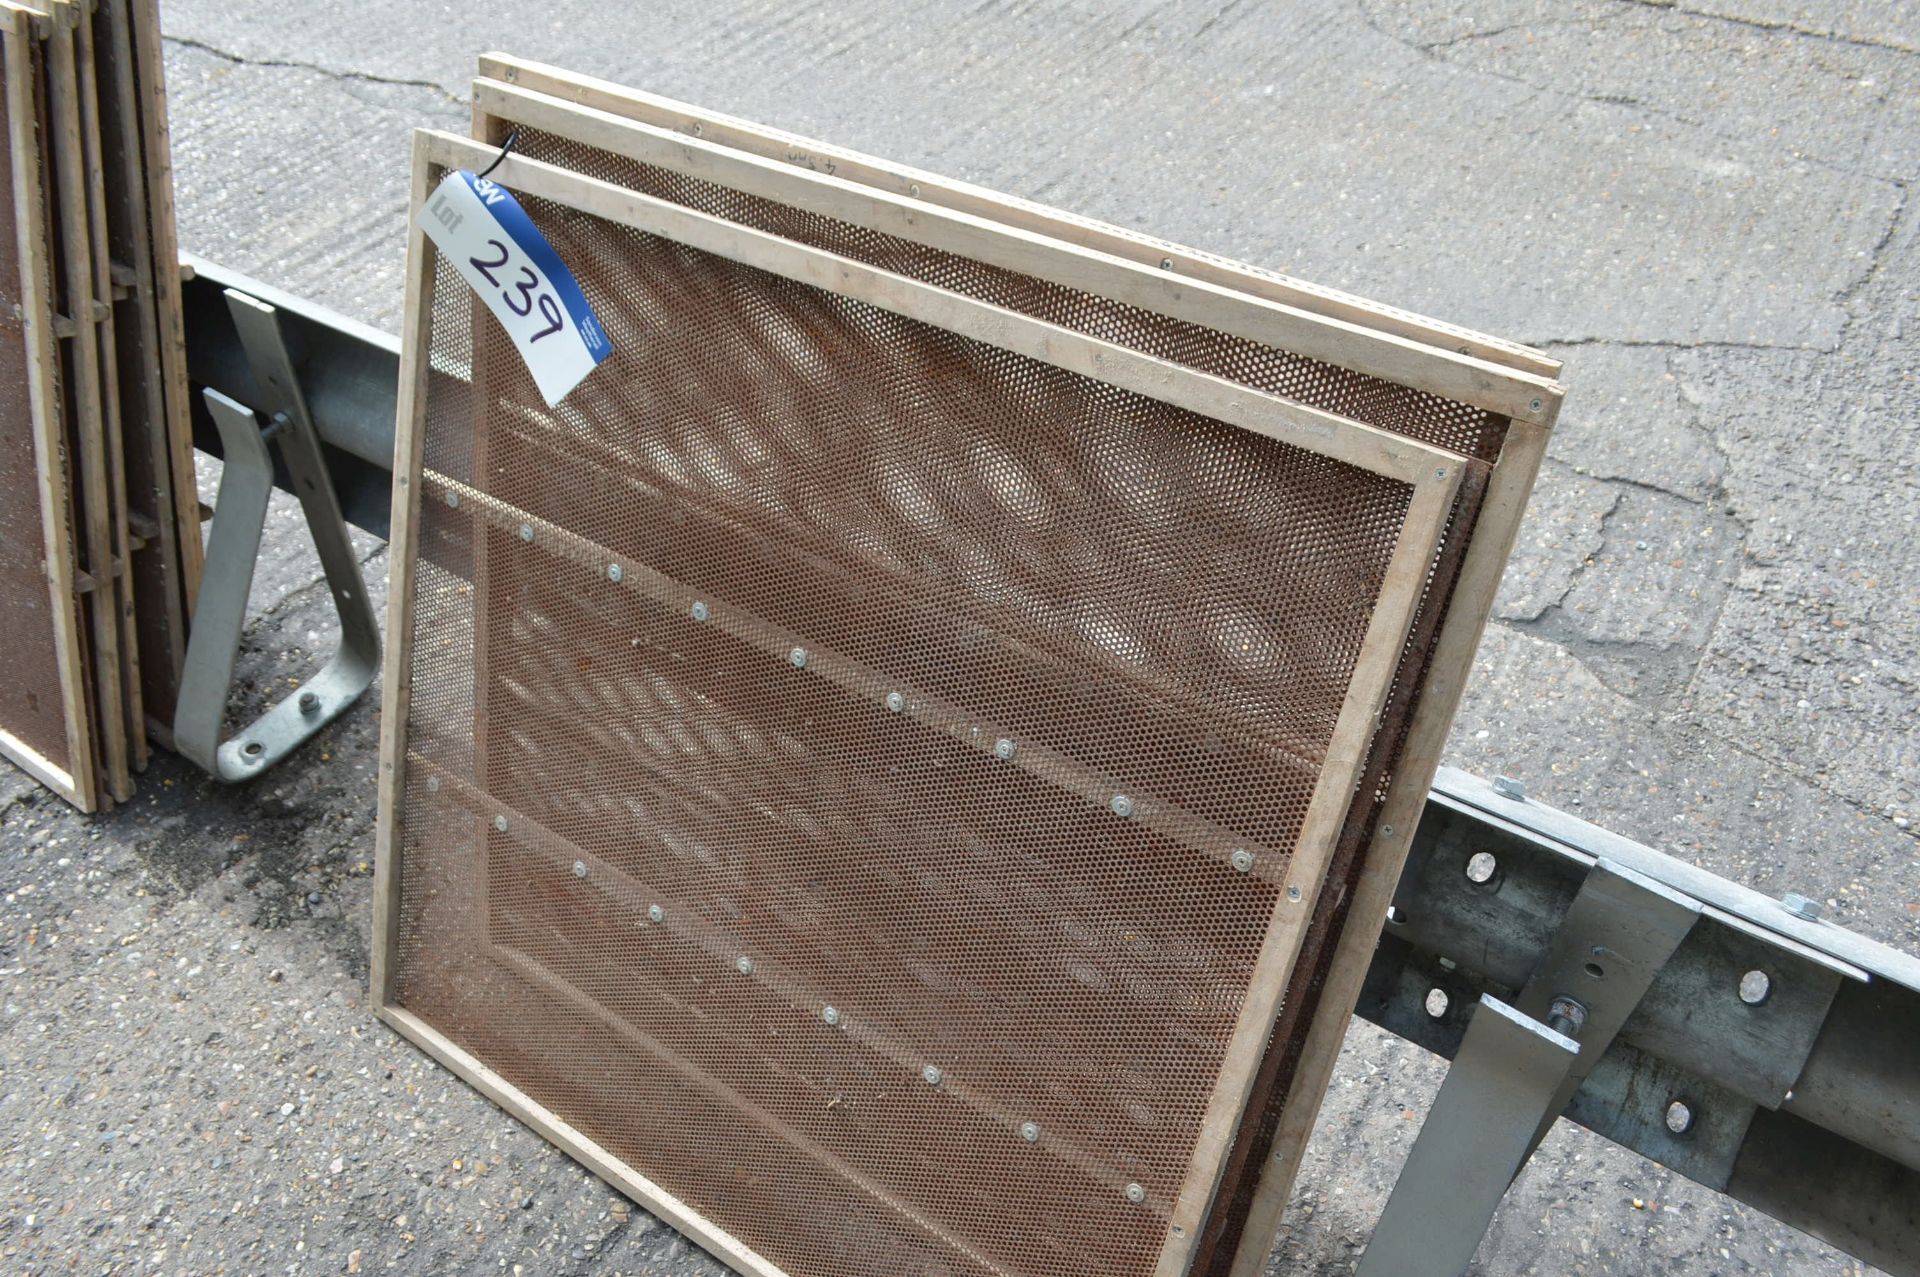 Three Timber Framed 4.5mm Perforated Screens, each